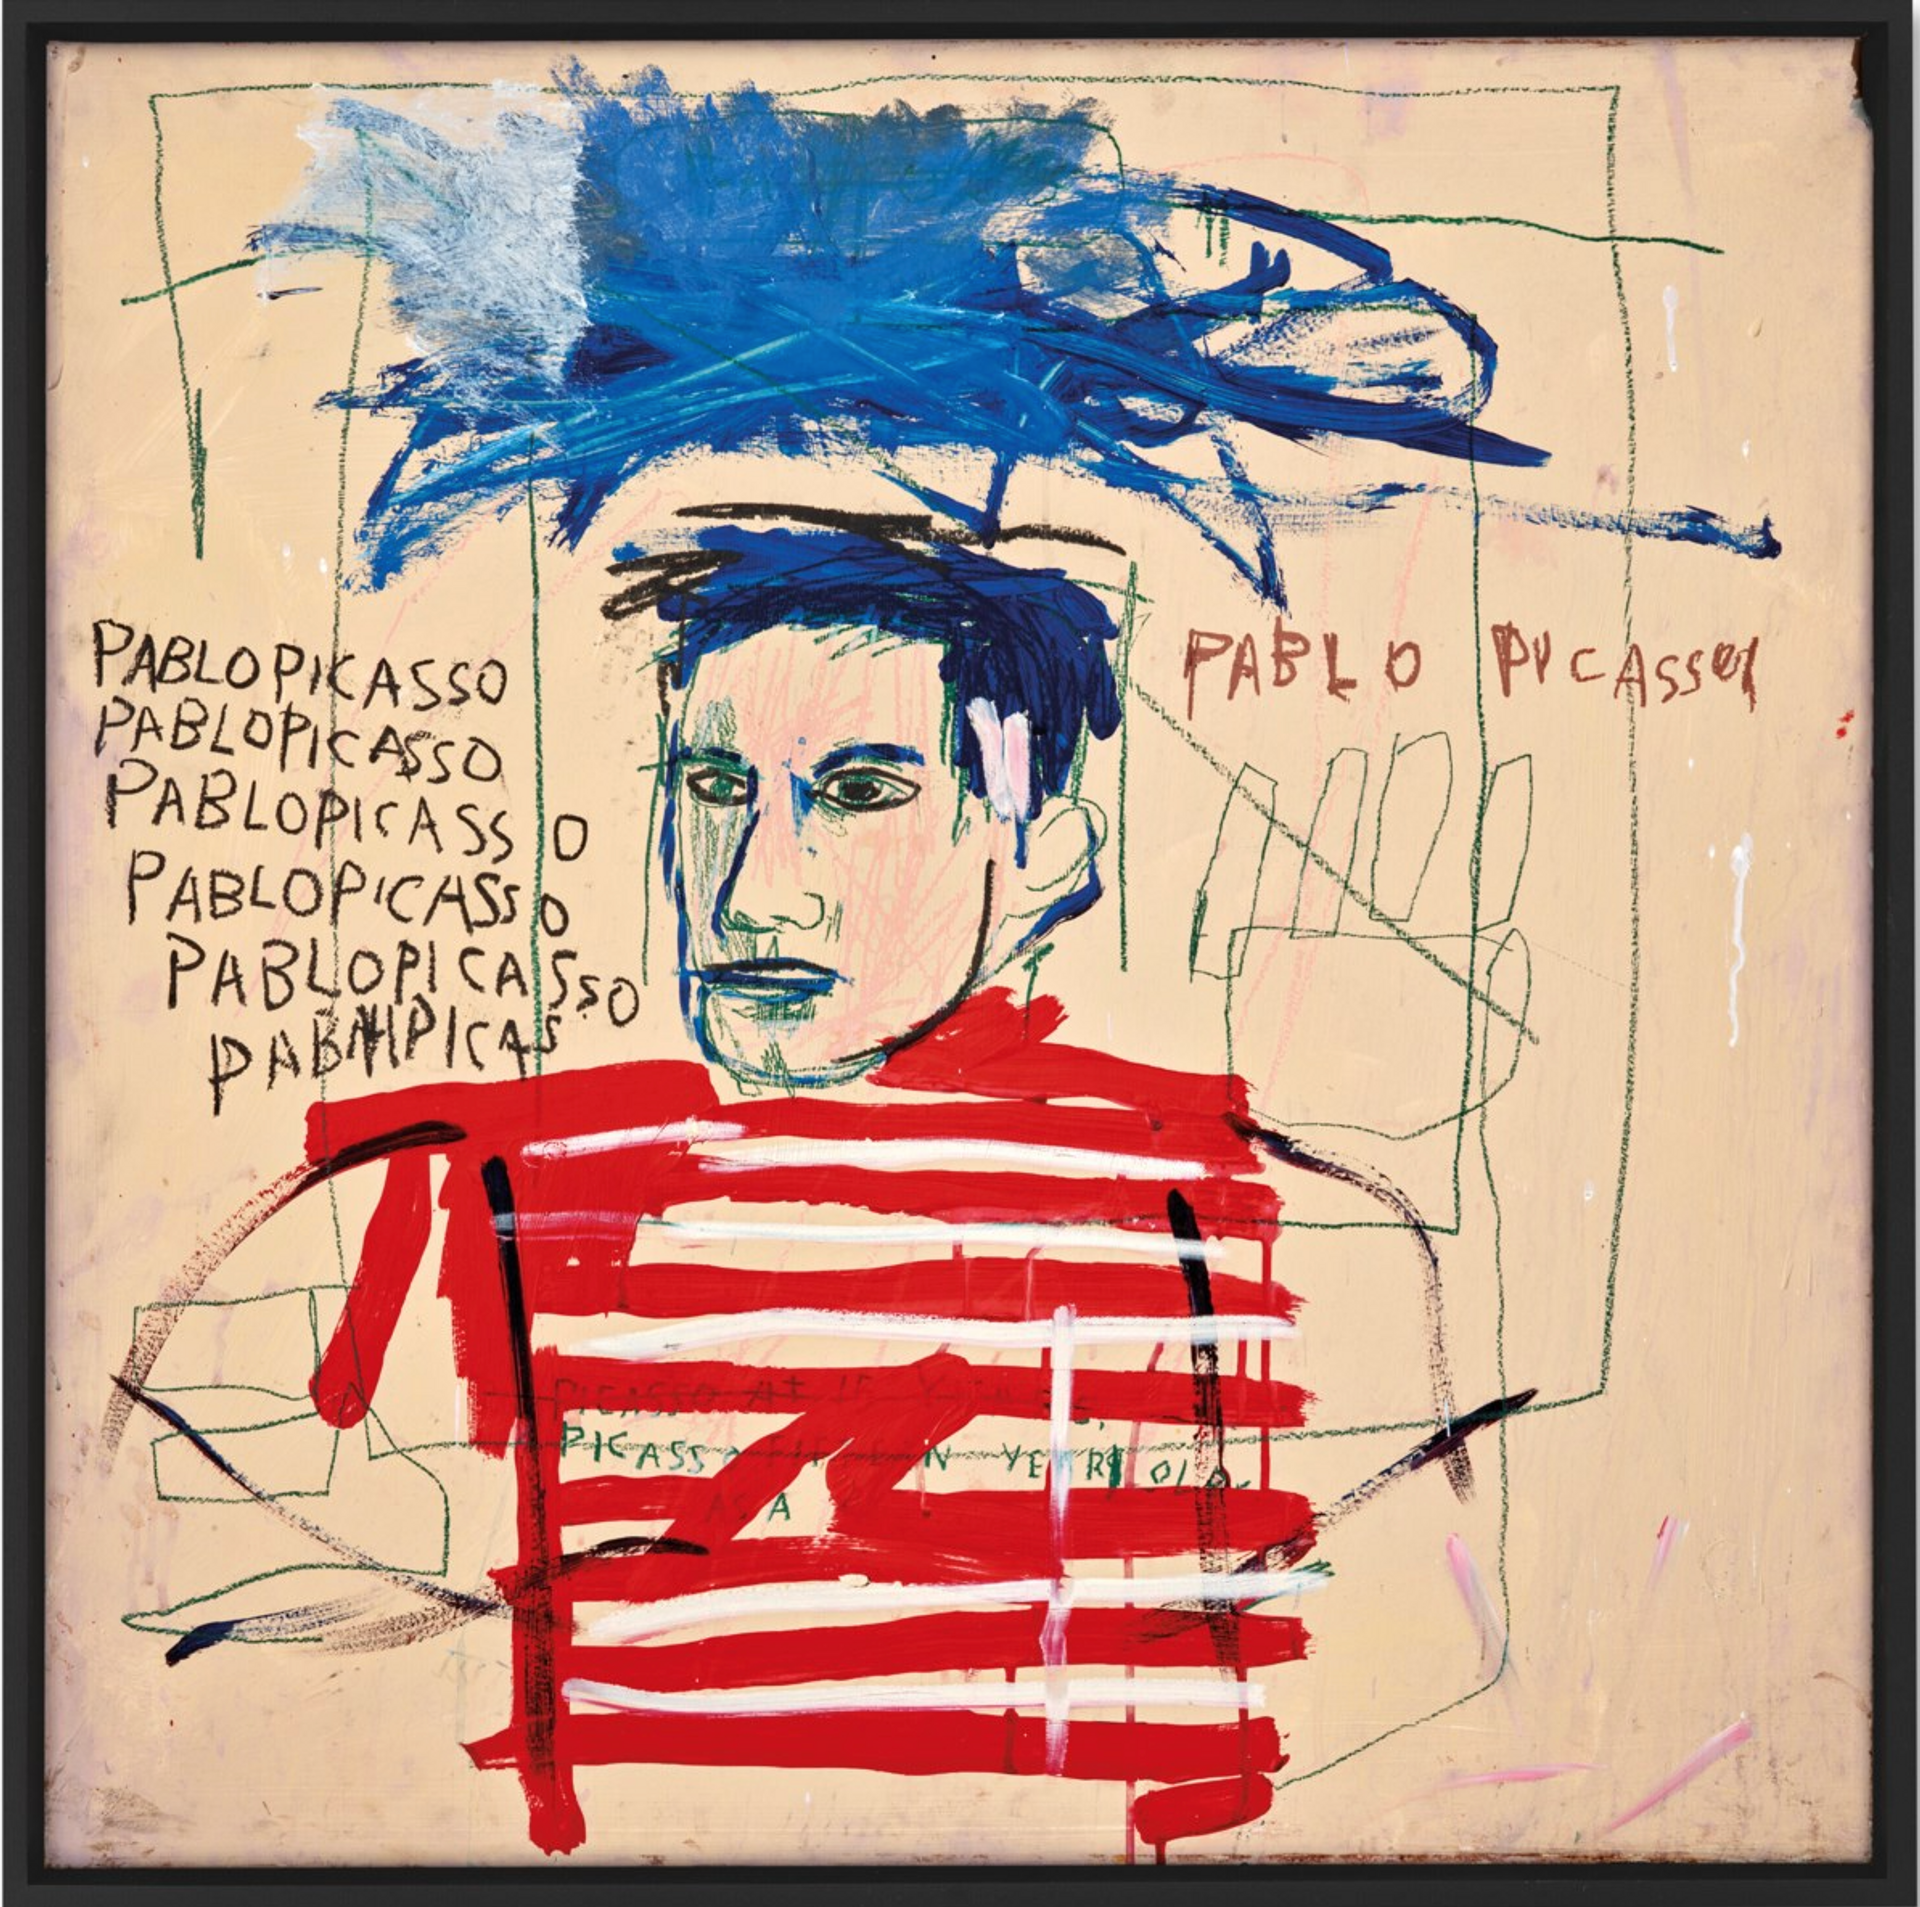 An image of a portrait of Pablo Picasso by Jean-Michel Basquiat. It shows Picasso wearing a red breton-striped shirt, with blue hair. A blue cloud floats above his head. The name “Pablo Picasso” is written repeatedly all over the painting.